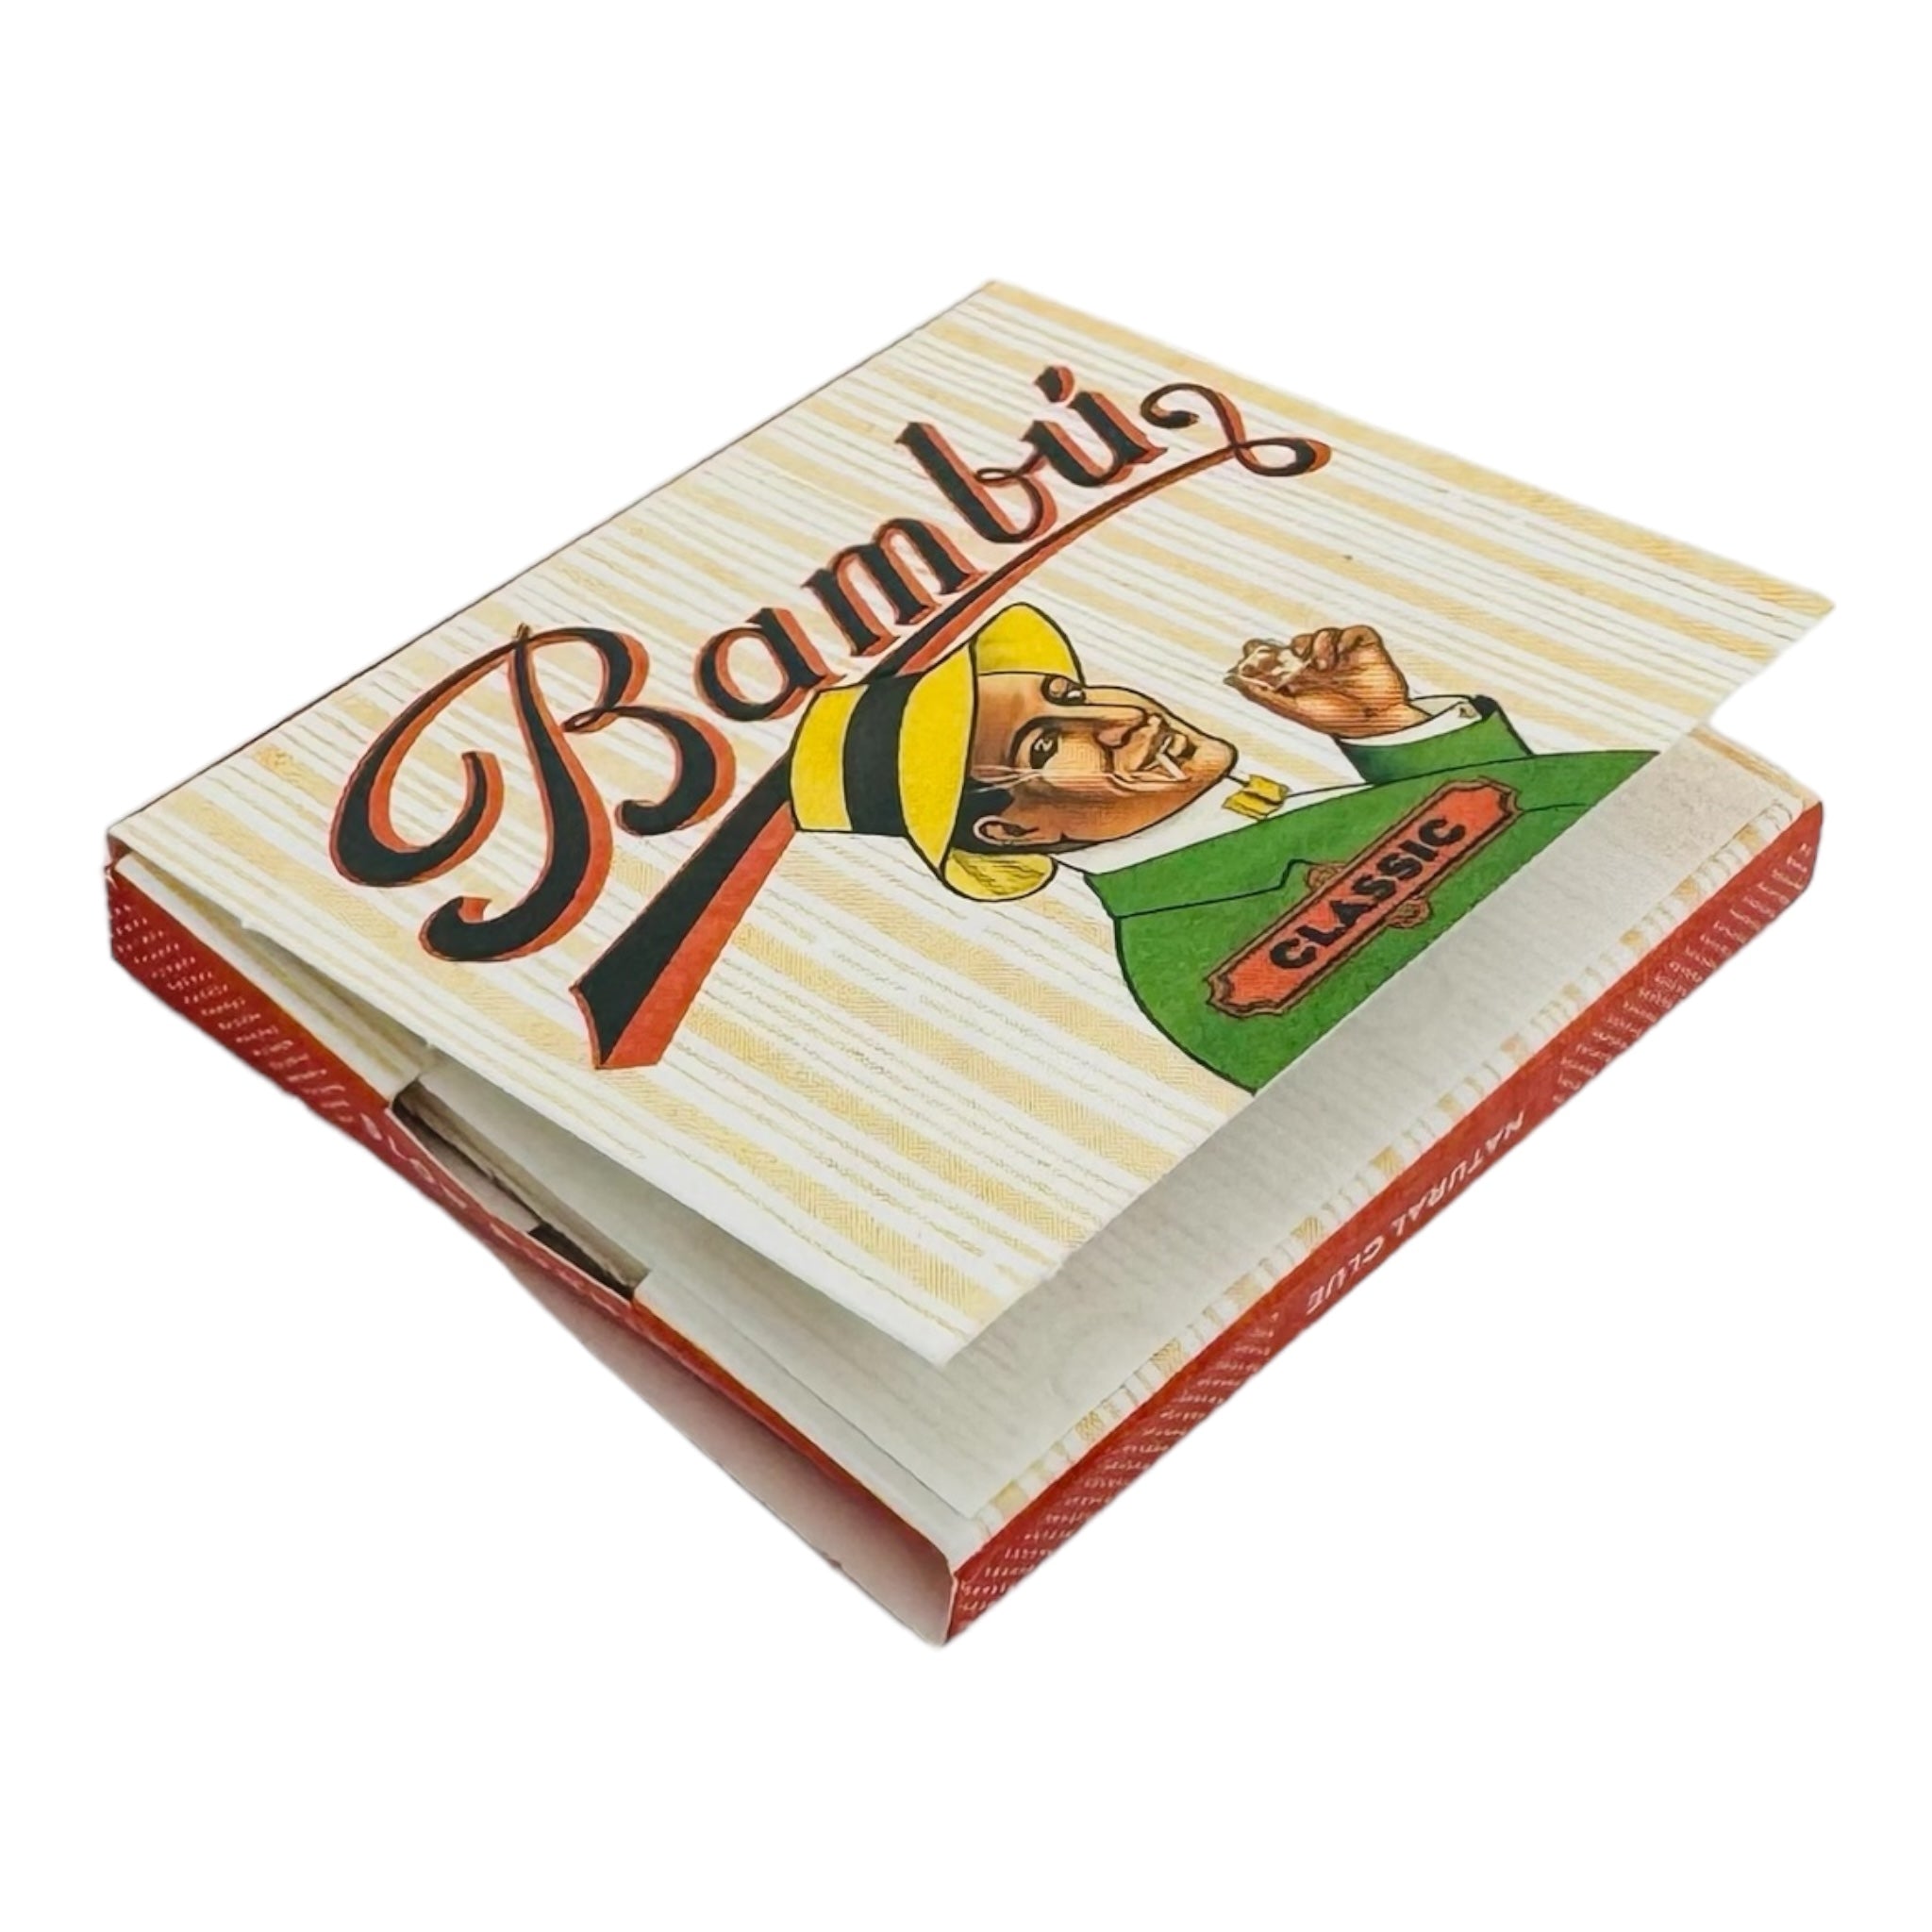 Bambu Rolling Papers Classic Size - 5 Packs for sale